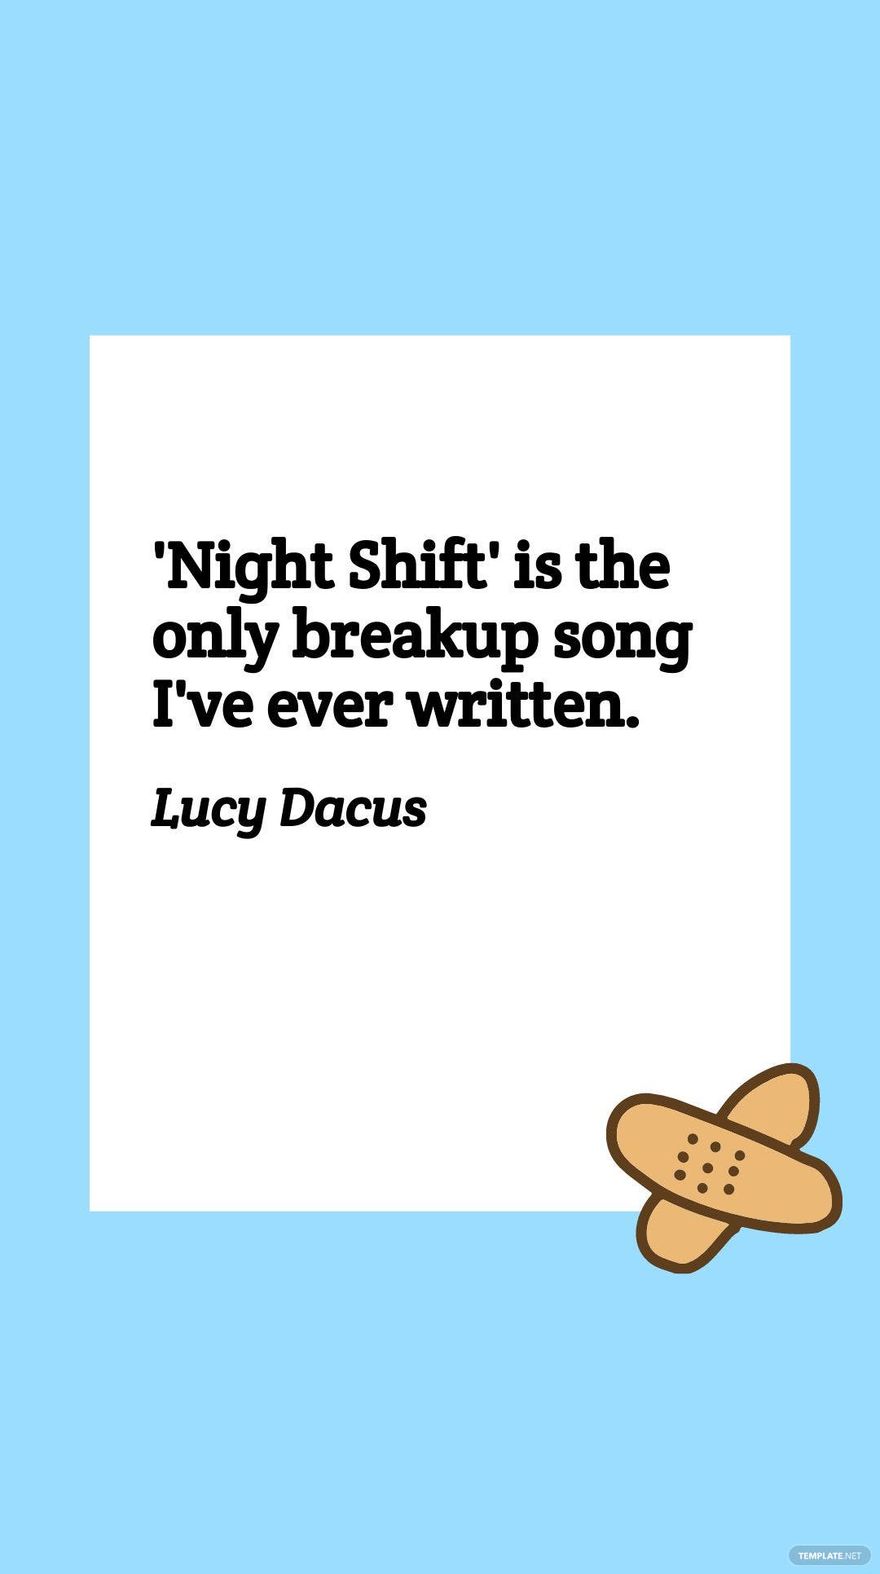 Night Shift - song and lyrics by Lucy Dacus